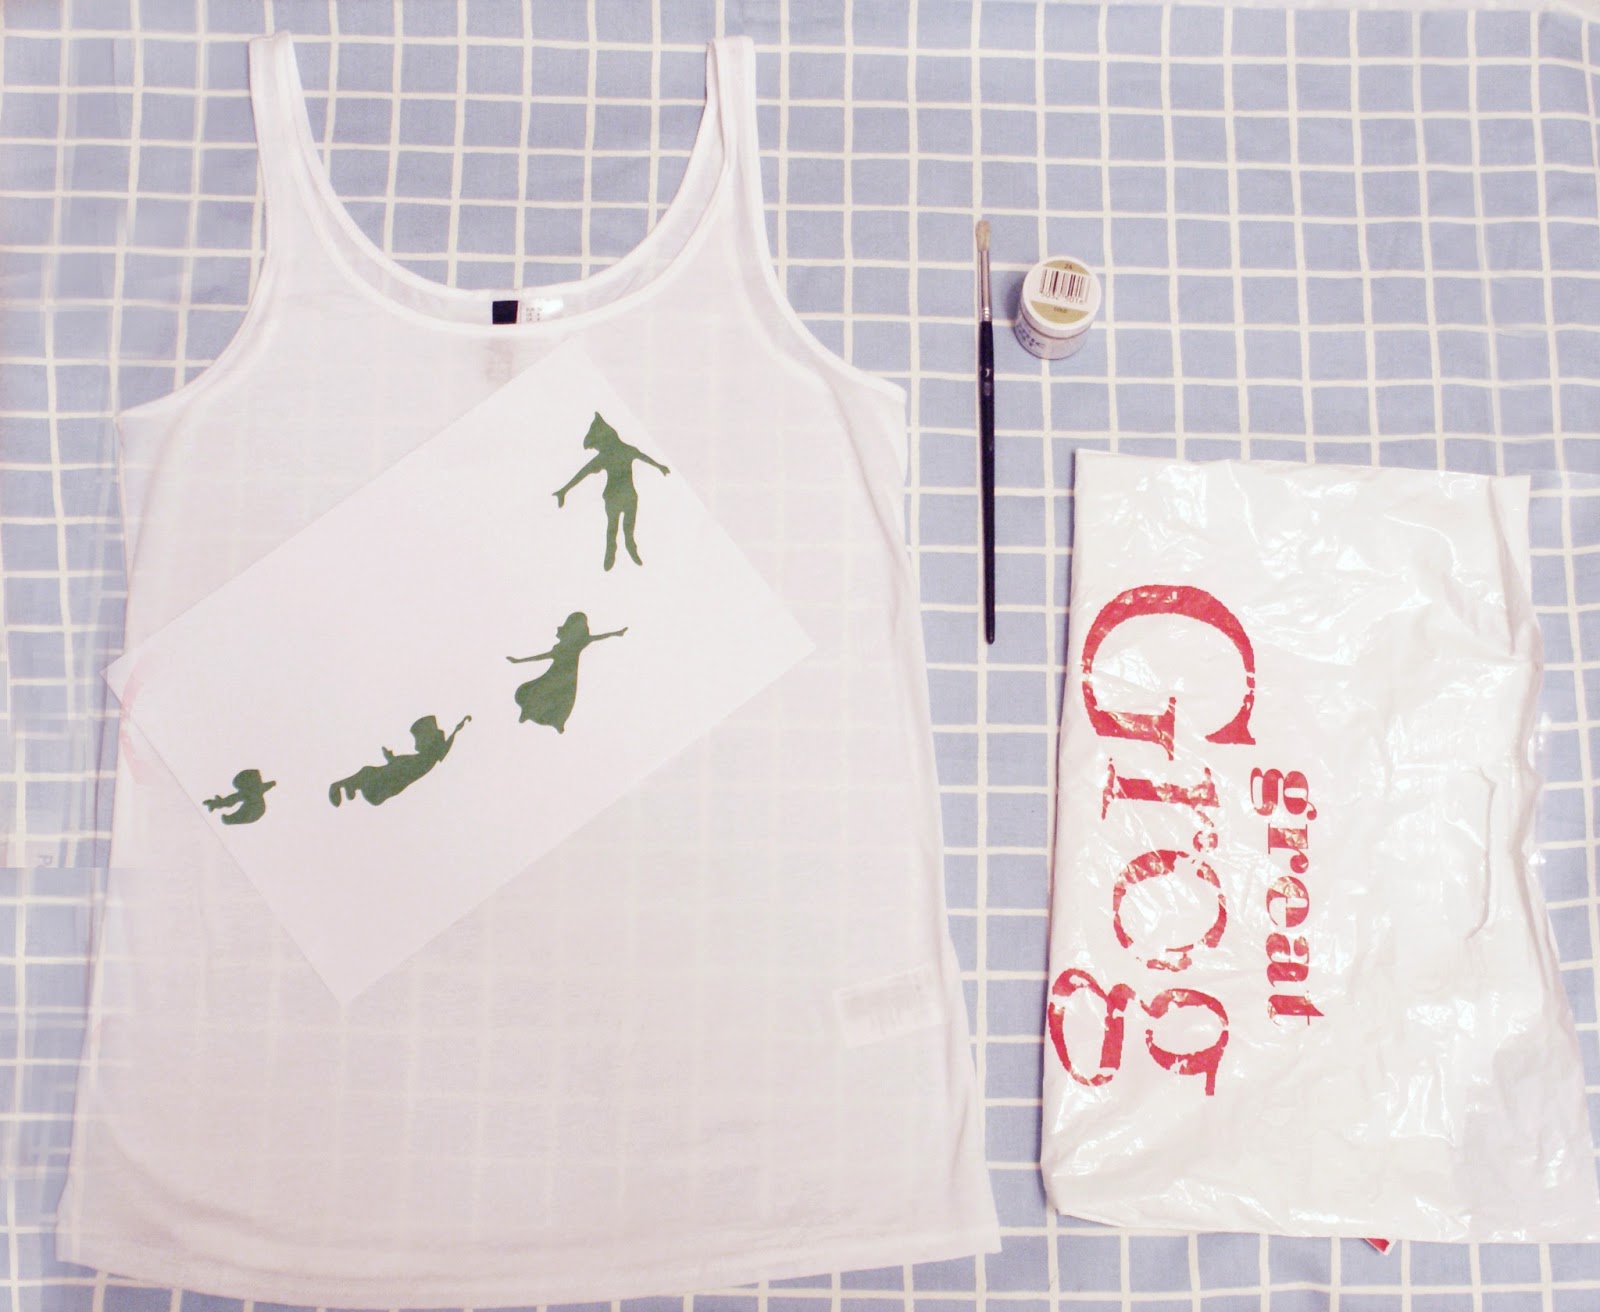 For making a 'freezer paper' fabric stencil and custom t shirt, you ...